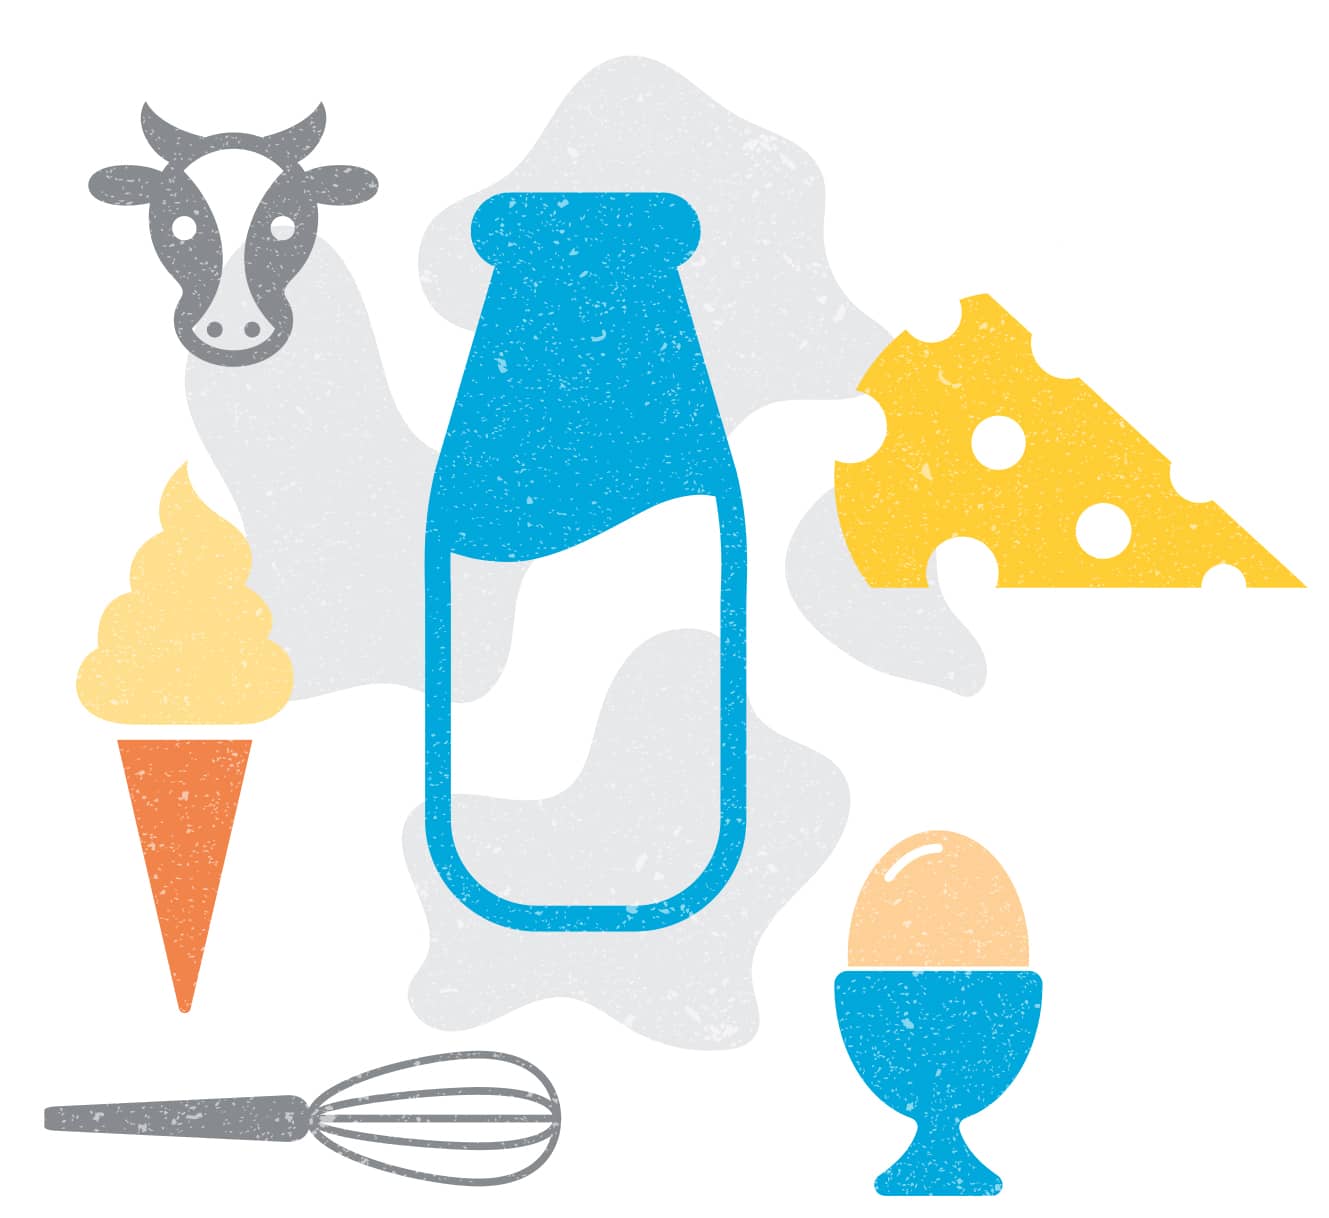 Dairy industry iconography